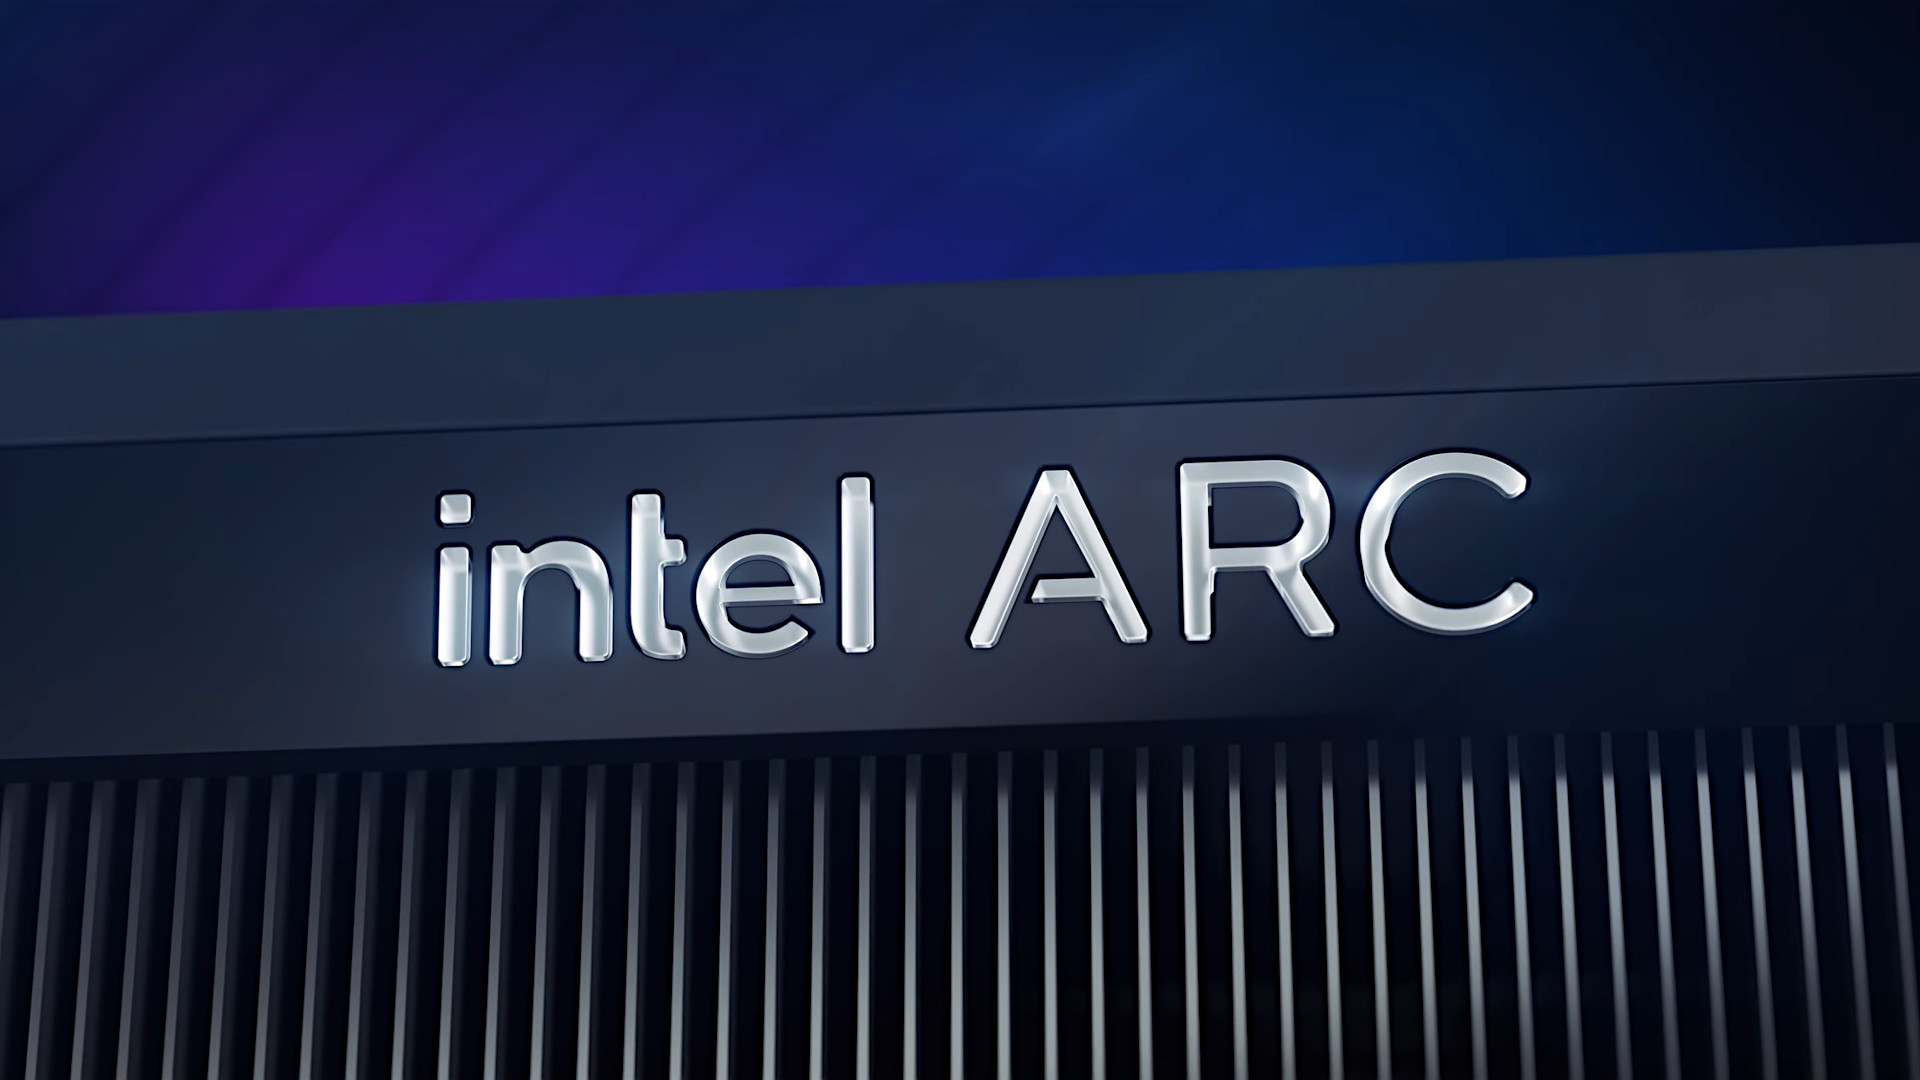 Intel Arc GPUs could beat Nvidia RTX ray tracing performance